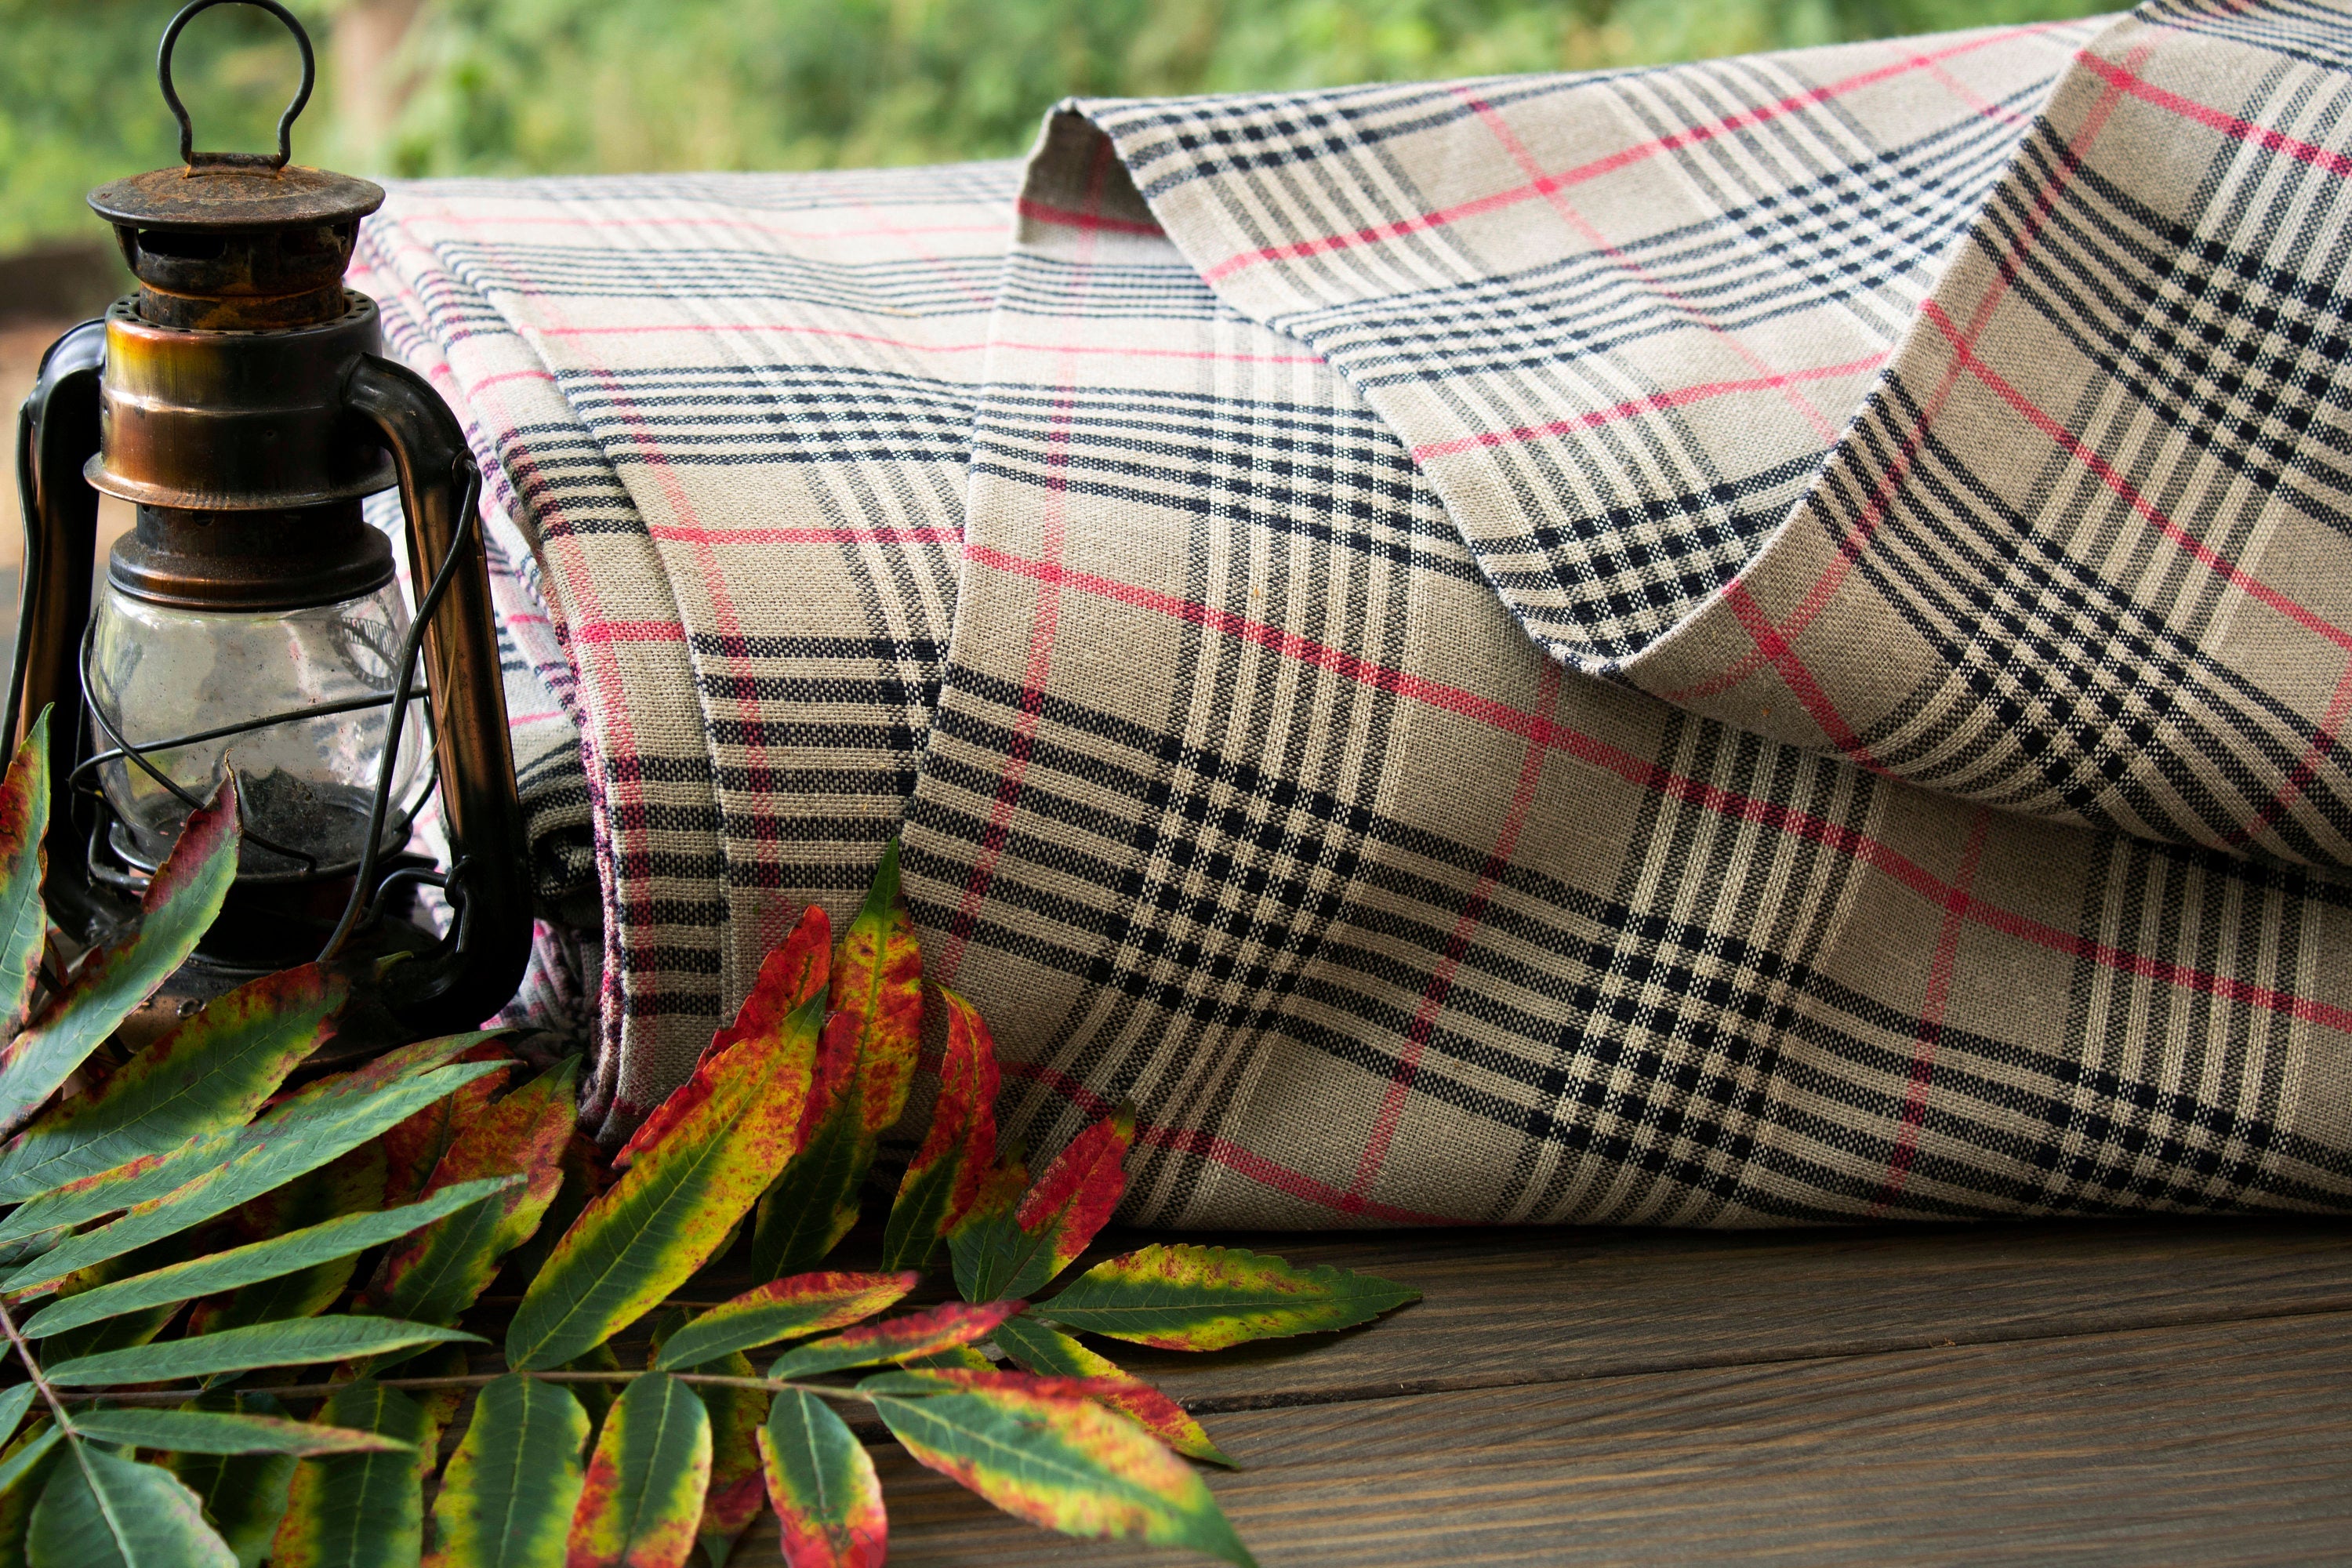 100% Linen Fabric by the Yard / Checked Linen Fabric / Buy Linen Online